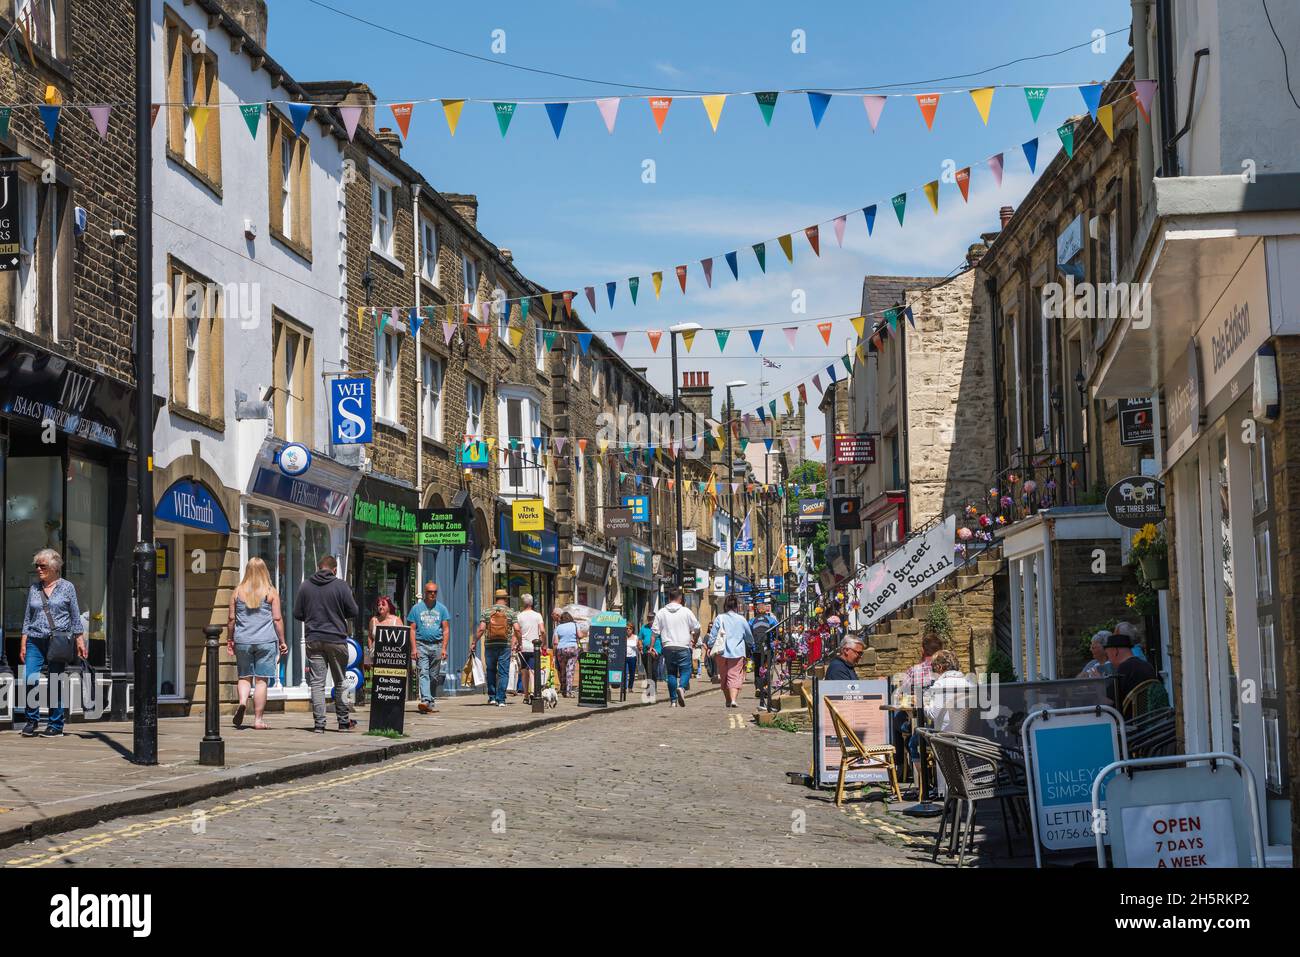 Skipton Yorkshire town, view in summer of people walking in Sheep Street, one of the oldest shopping thoroughfares in Skipton, Yorkshire, England, UK Stock Photo